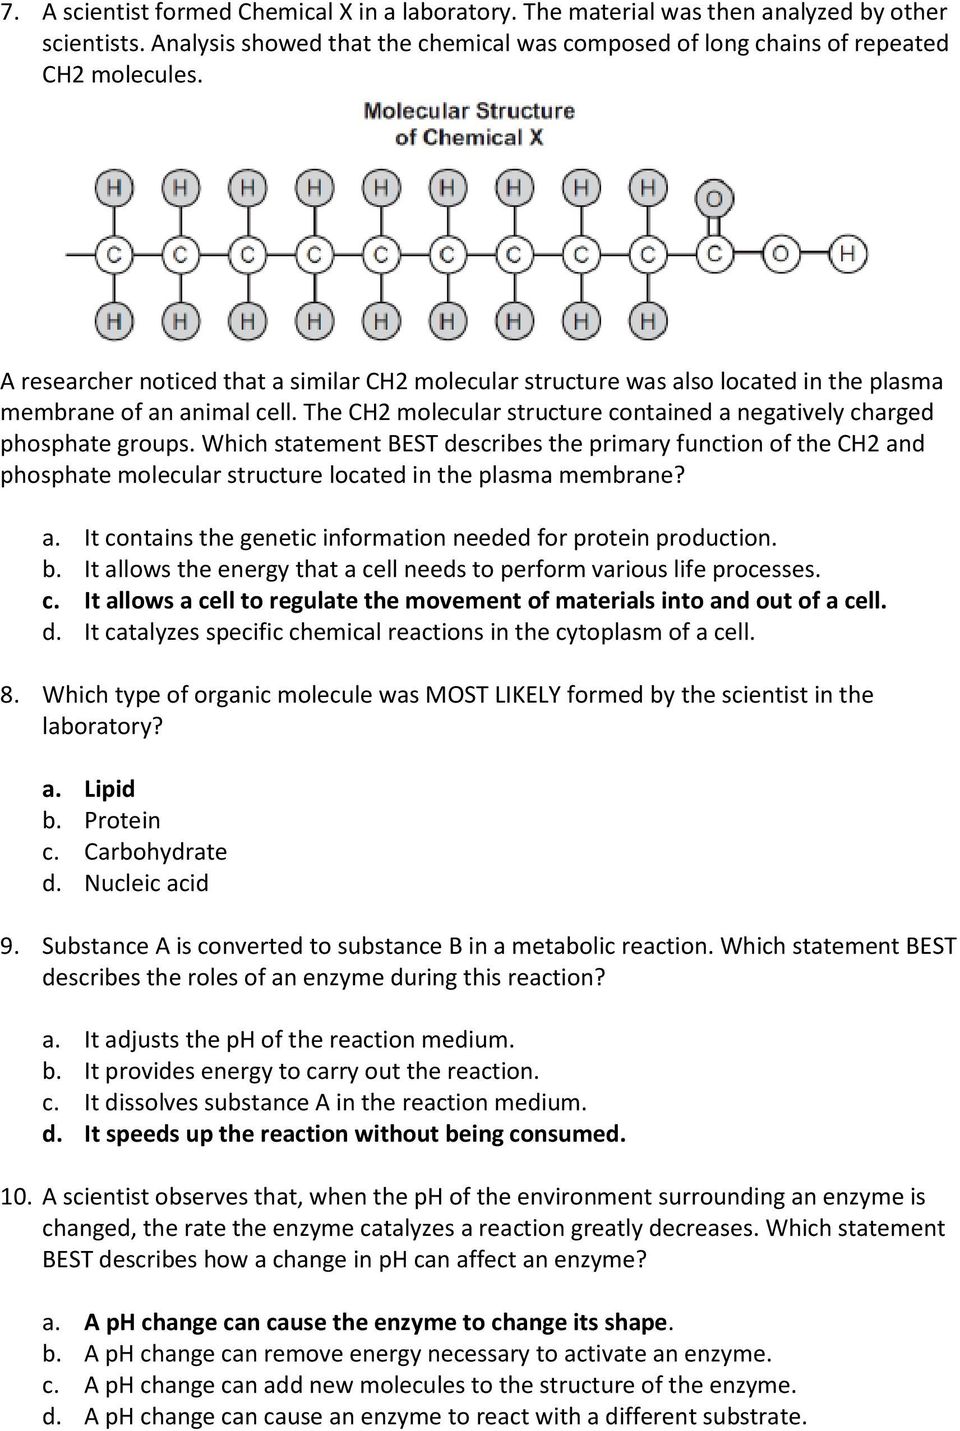 Which statement BEST describes the primary function of the CH2 and phosphate molecular structure located in the plasma membrane? a. It contains the genetic information needed for protein production.